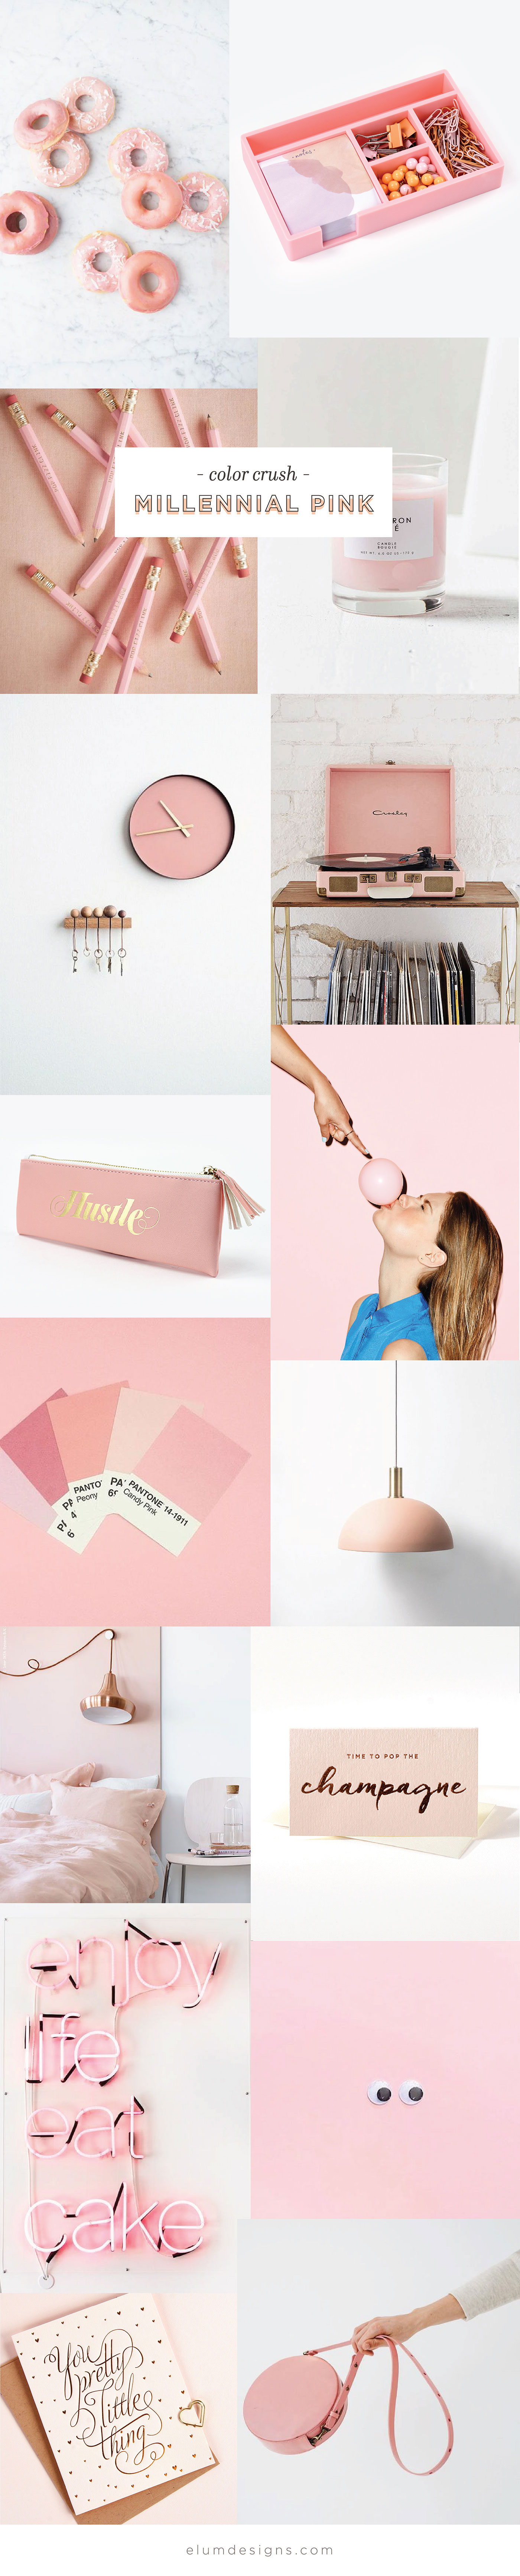 Color Crush: Millennial Pink